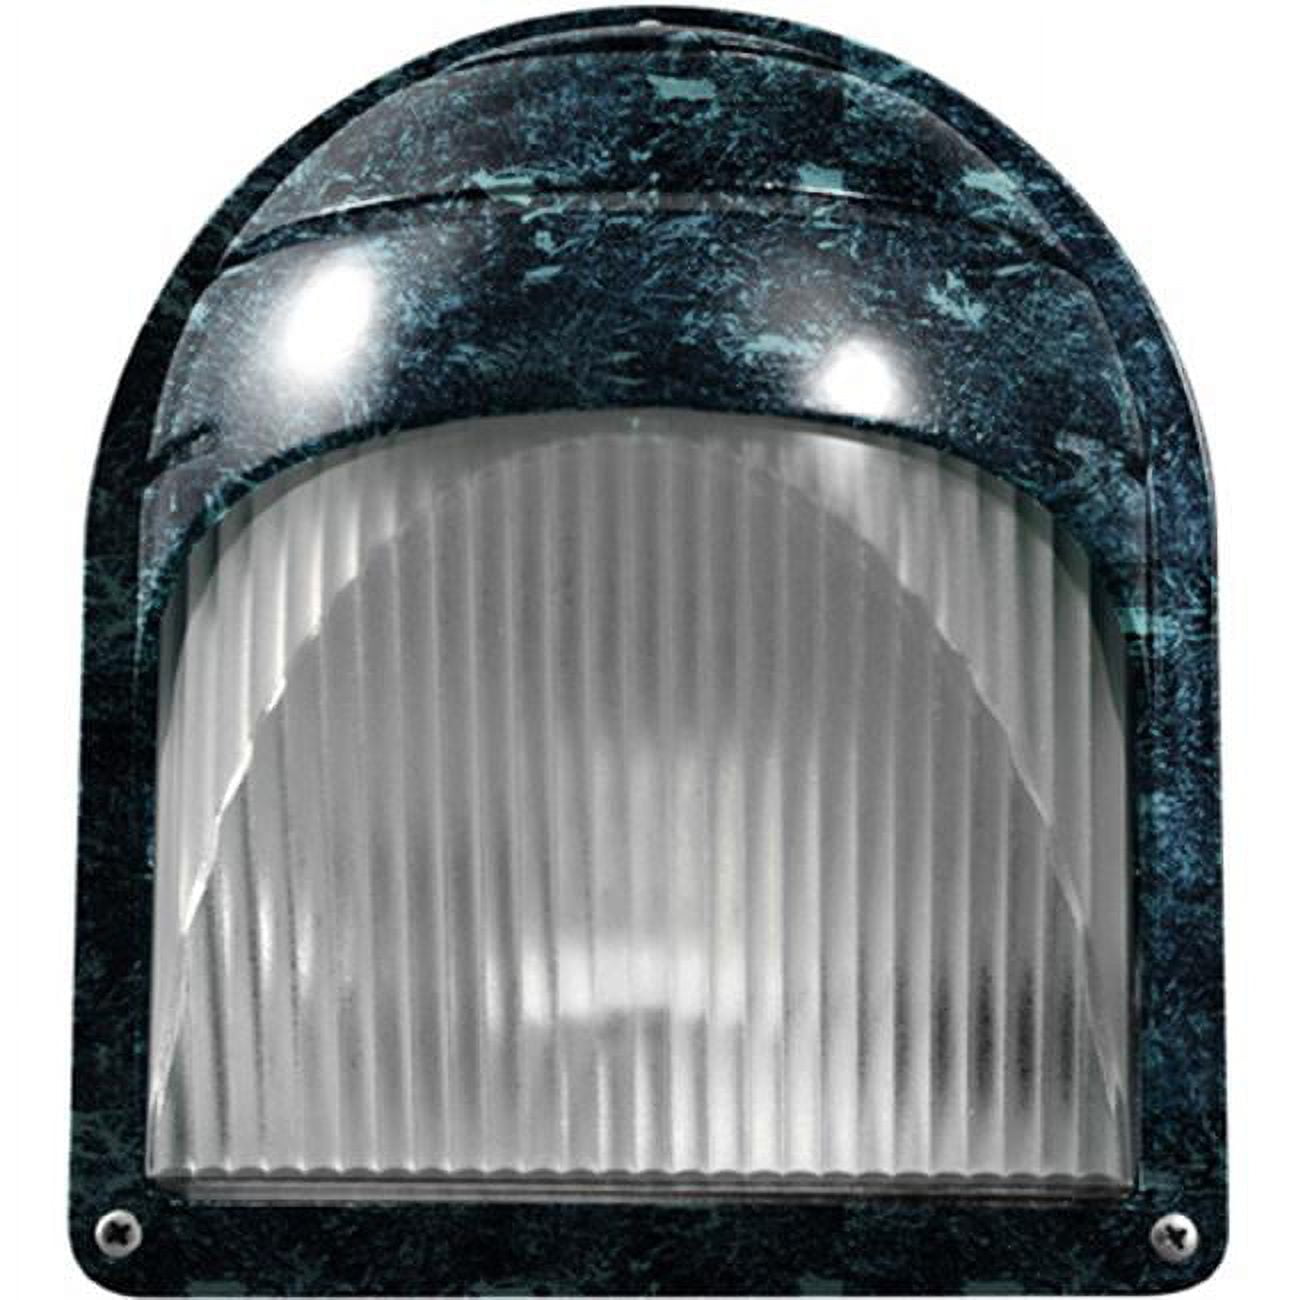 Picture of Dabmar Lighting W2986-VG 8 x 7.06 x 5 in. 120 V 26 watts Powder Coated Cast Aluminum Surface Mounted Wall Fixture Light with S26-GU-24 Flourescent Lamp, Verde Green